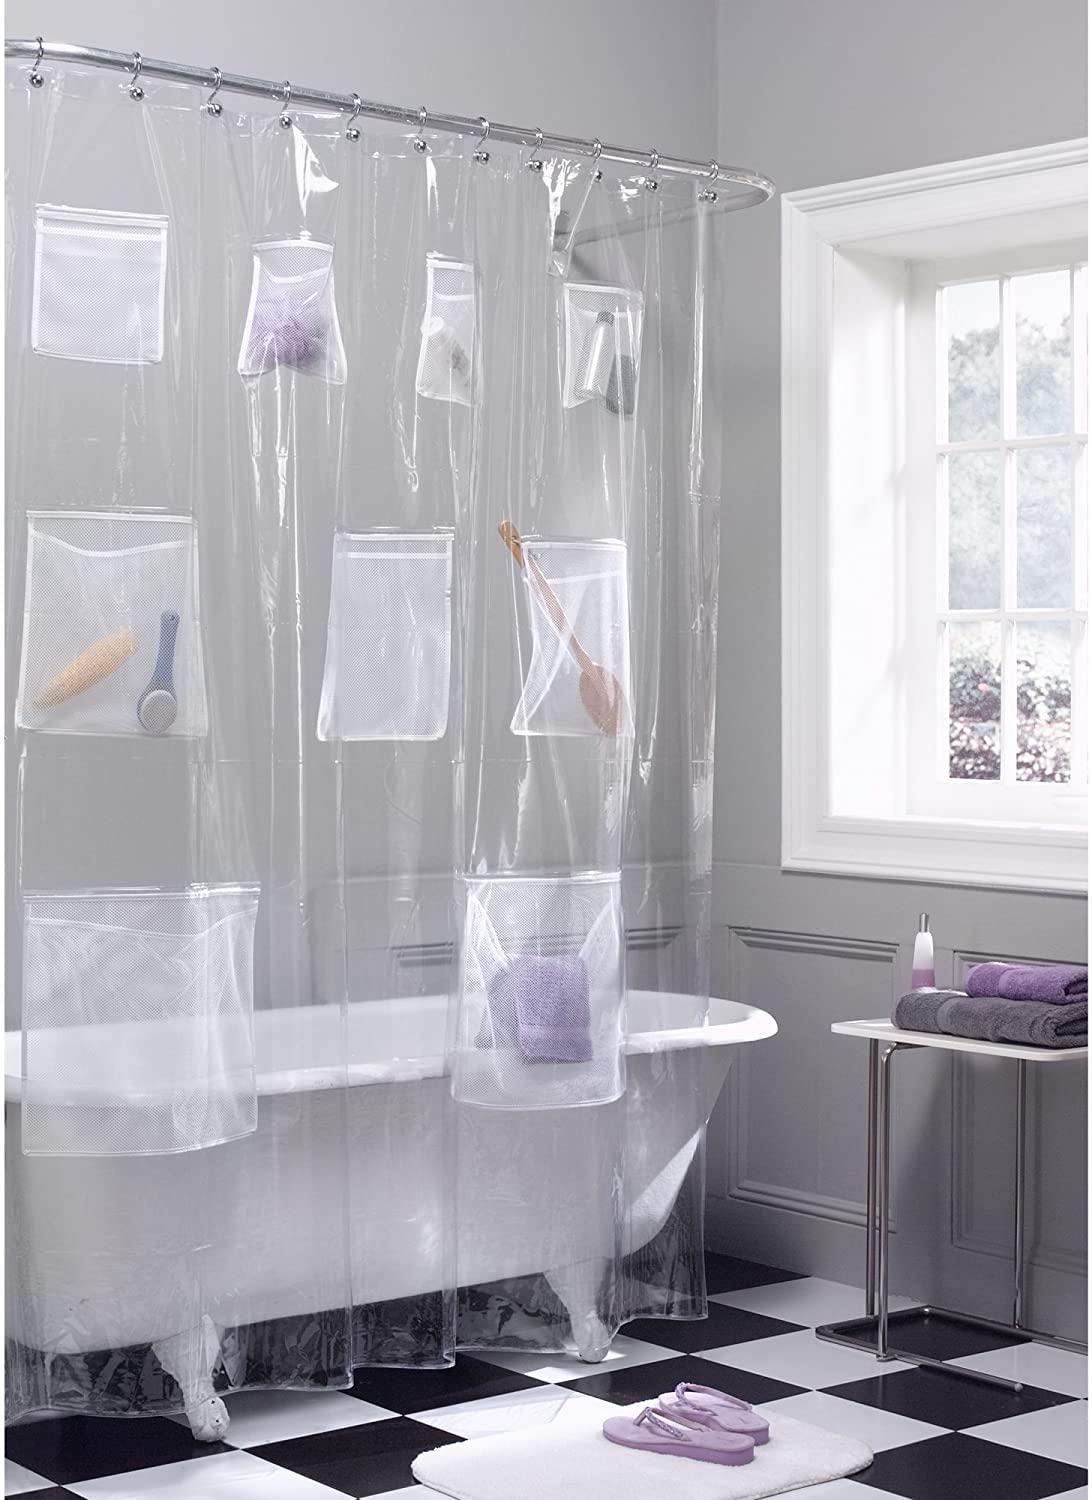 https://cdn.shopify.com/s/files/1/1095/4966/products/ShowerCurtainwithStoragePockets-Tidy3.jpg?v=1623249923